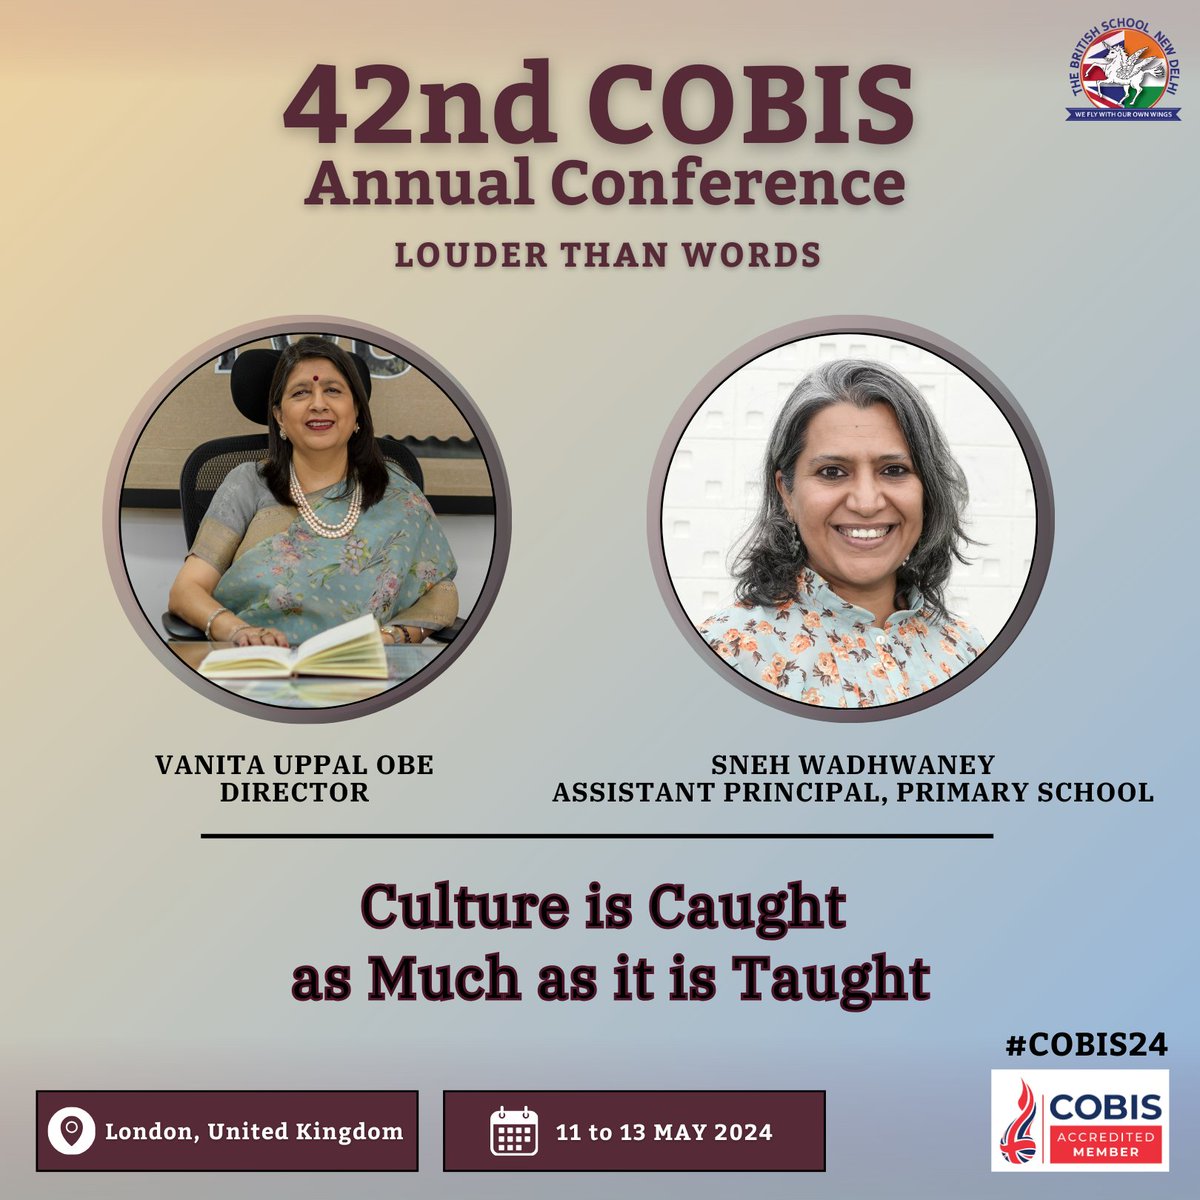 We are excited to share that both our Director, @VuppalTBS OBE, and @sneh_wadhwaney, Assistant Principal for Primary, will be speaking at the 42nd Annual @COBISorg Conference in London! They will be talking about how Culture is Caught as Much as it is Taught. #TBSDelhi #COBIS24